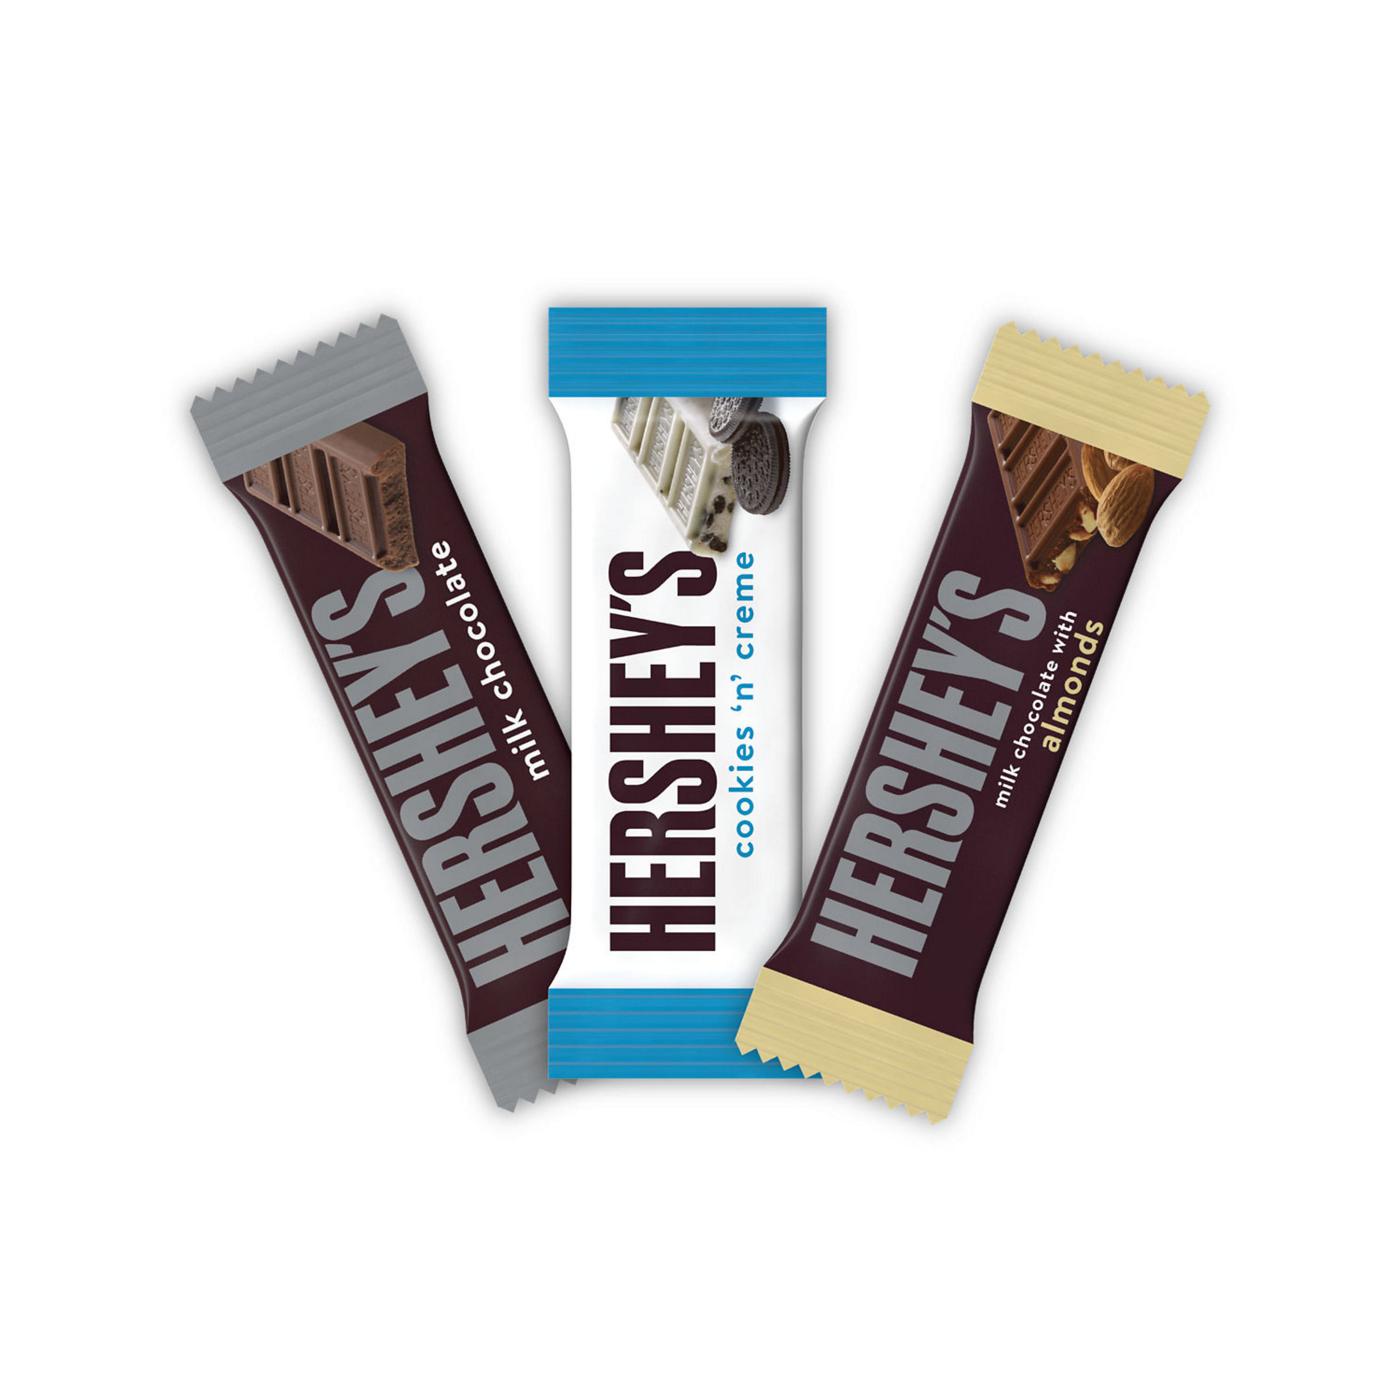 Hershey's Assorted Snack Size Chocolate Candy - Party Pack; image 2 of 7